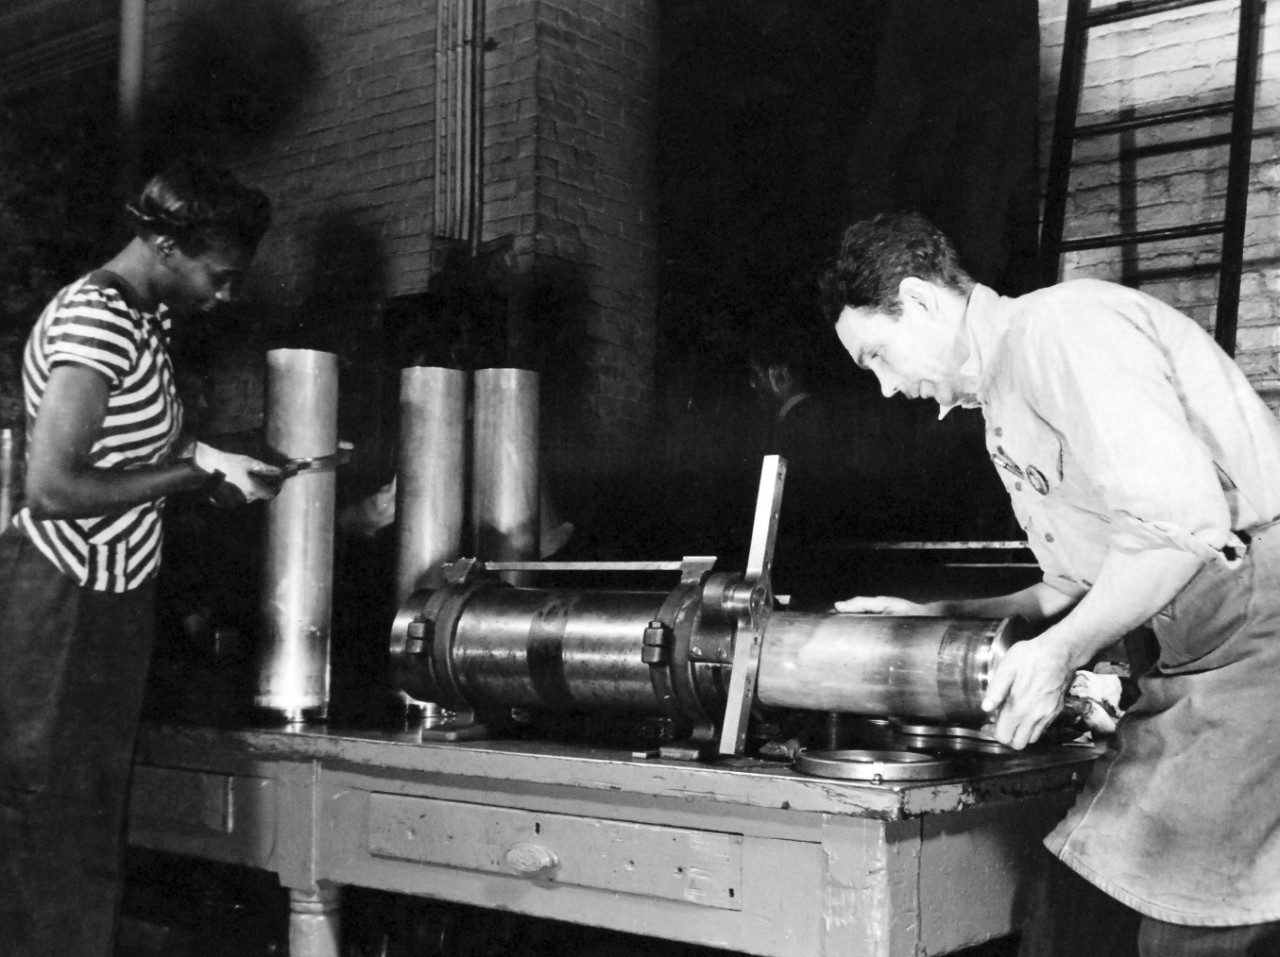 80-G-38502:  U.S. Naval Gun Factory, Washington Navy Yard, 1943.   Shown:  Checking body dimensions on 5” cartridge cases.  Photograph released March 20, 1943.   Official U.S. Navy photograph, now in the collections of the National Archives.  